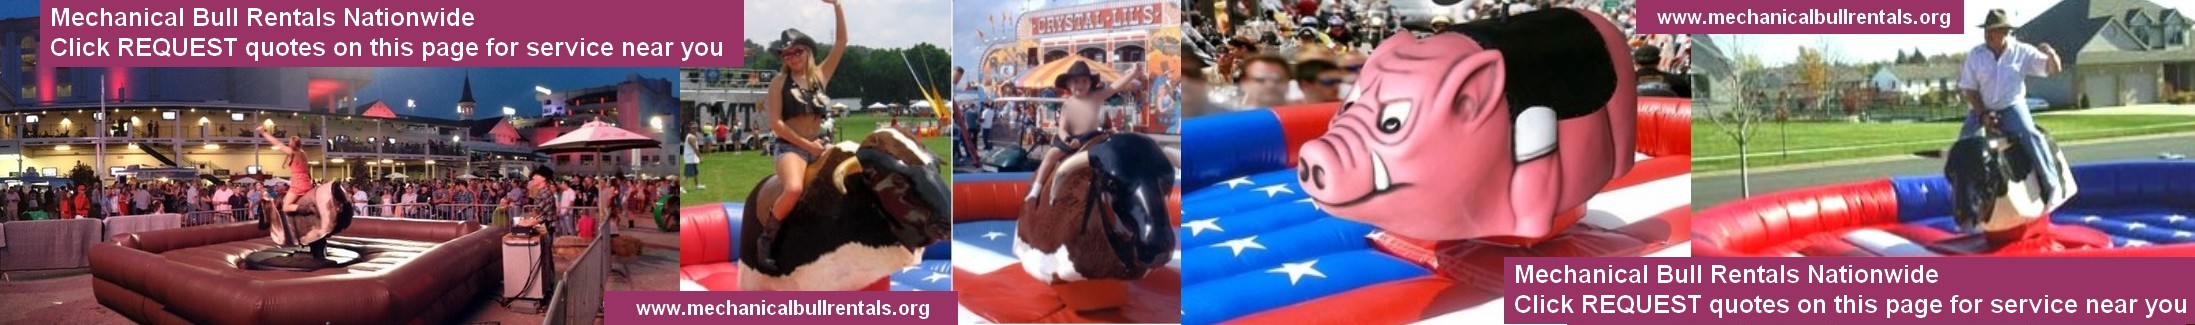 Mechanical Bull Rentals Hackensack New Jersey NJ and near you. Free referrals to local mechanical bull companies LOGO